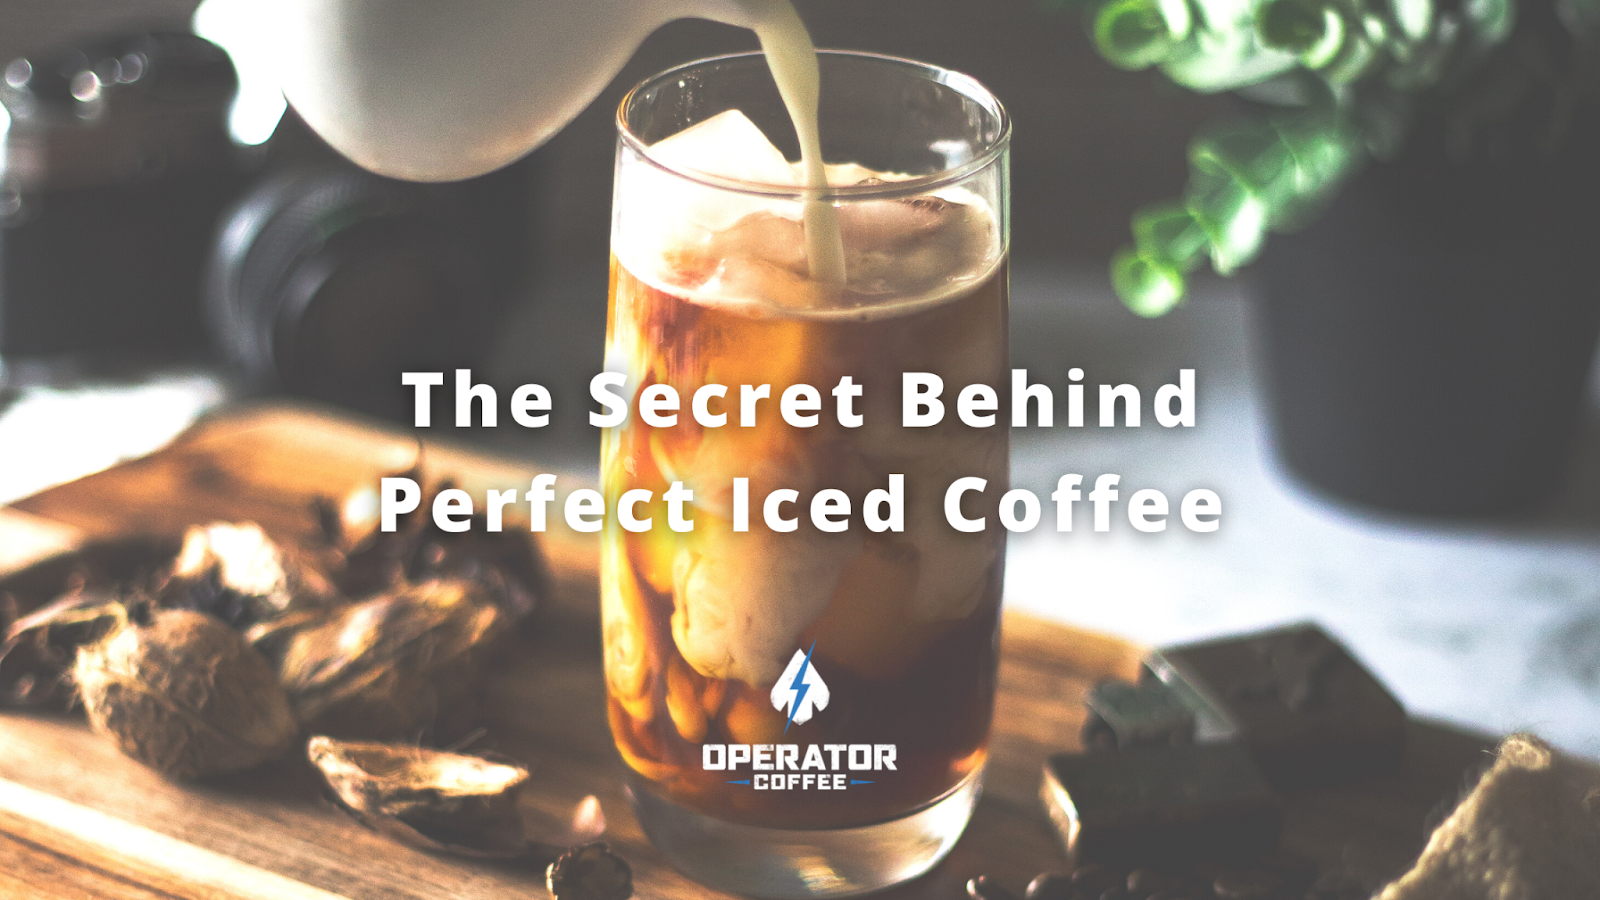 The Secret Behind Perfect Iced Coffee